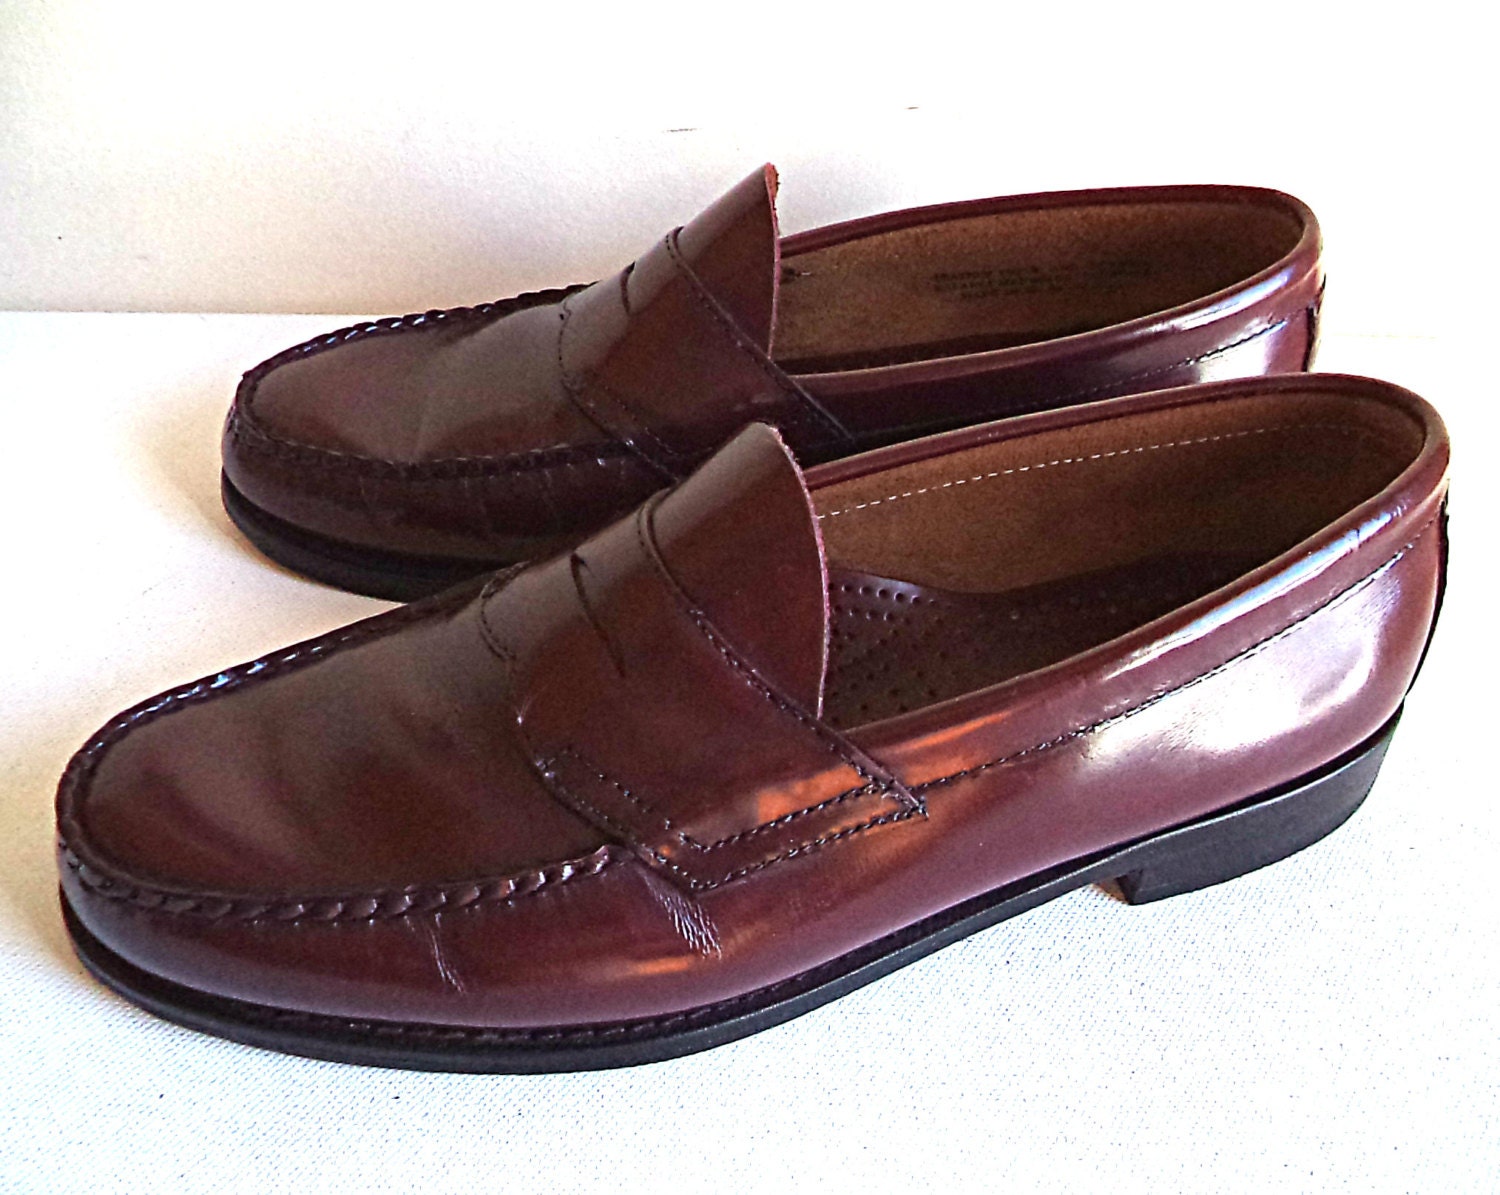 Men's 9 M BASS WEEJUNS Penny LOAFERS Refurbished Brown